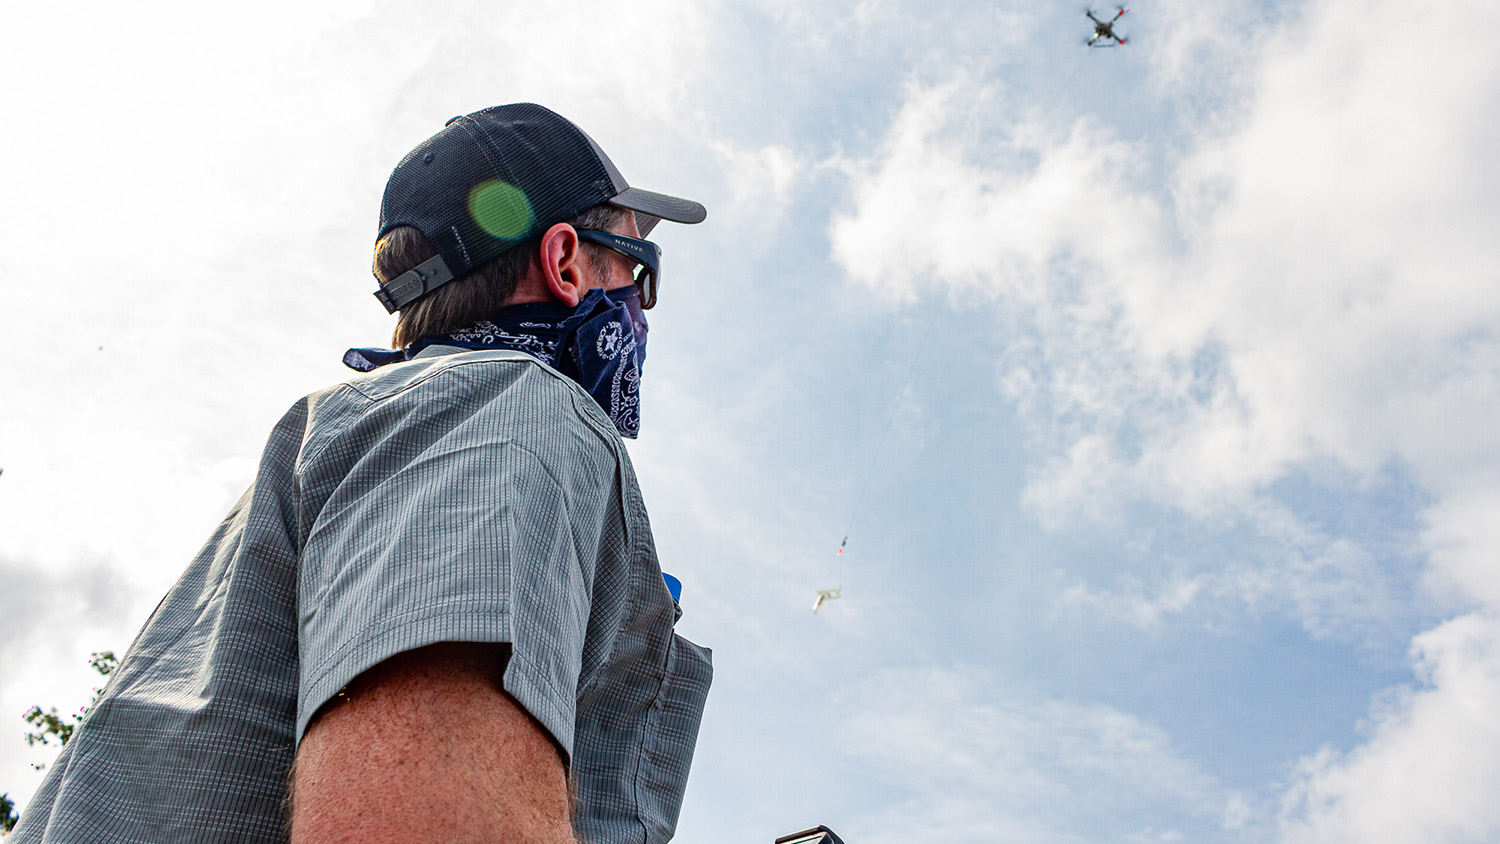 Will Reckling pilots a drone custom-equipped to sample water